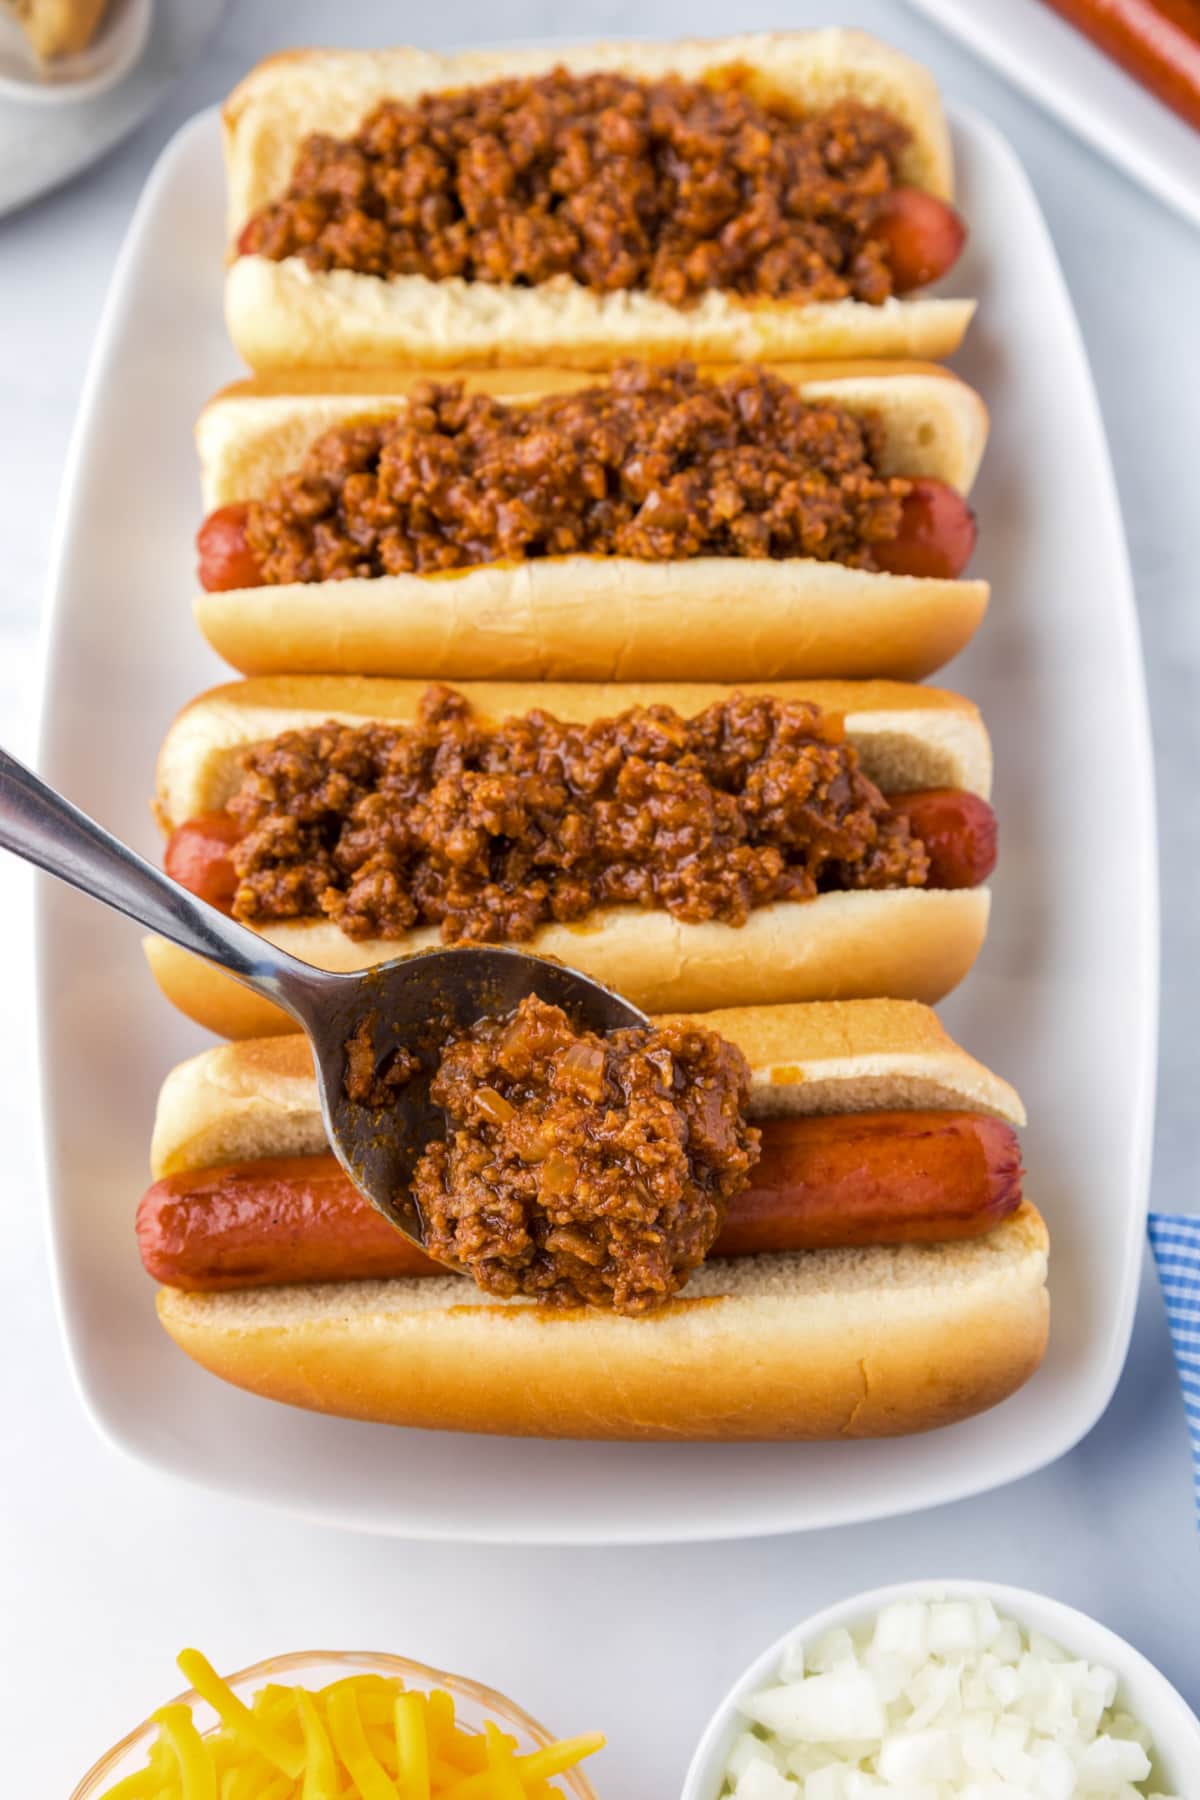 spoonful of hot dog chili added to hot dogs in buns